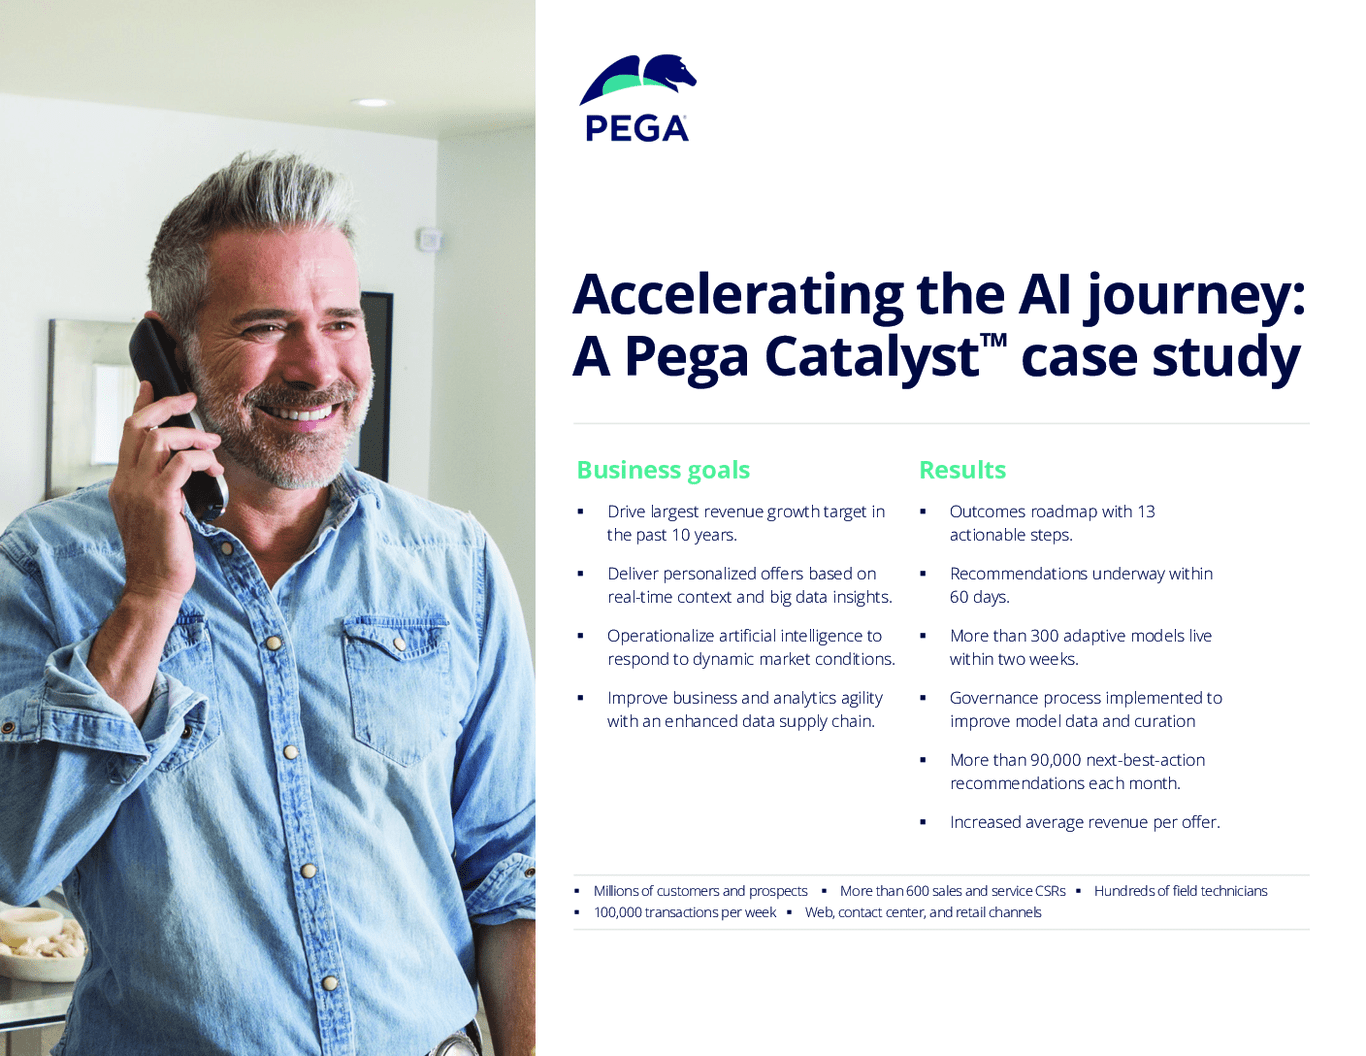 Accelerating the AI journey: A Pega Catalyst case study